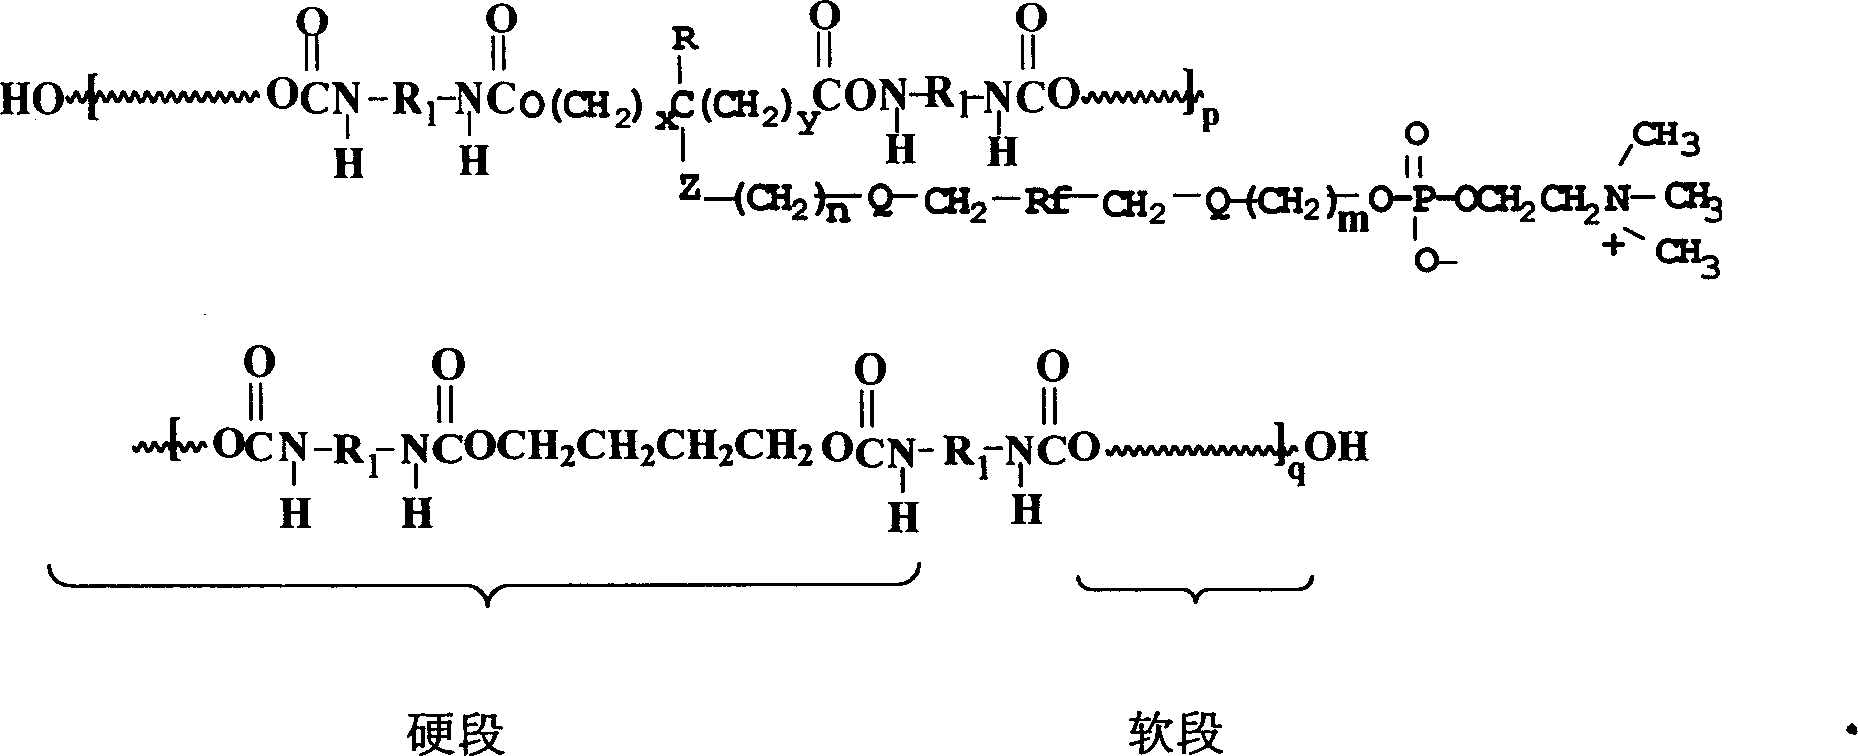 Polyurethane material with side chain possessing fluorophosphatidylcholine and its preparation method